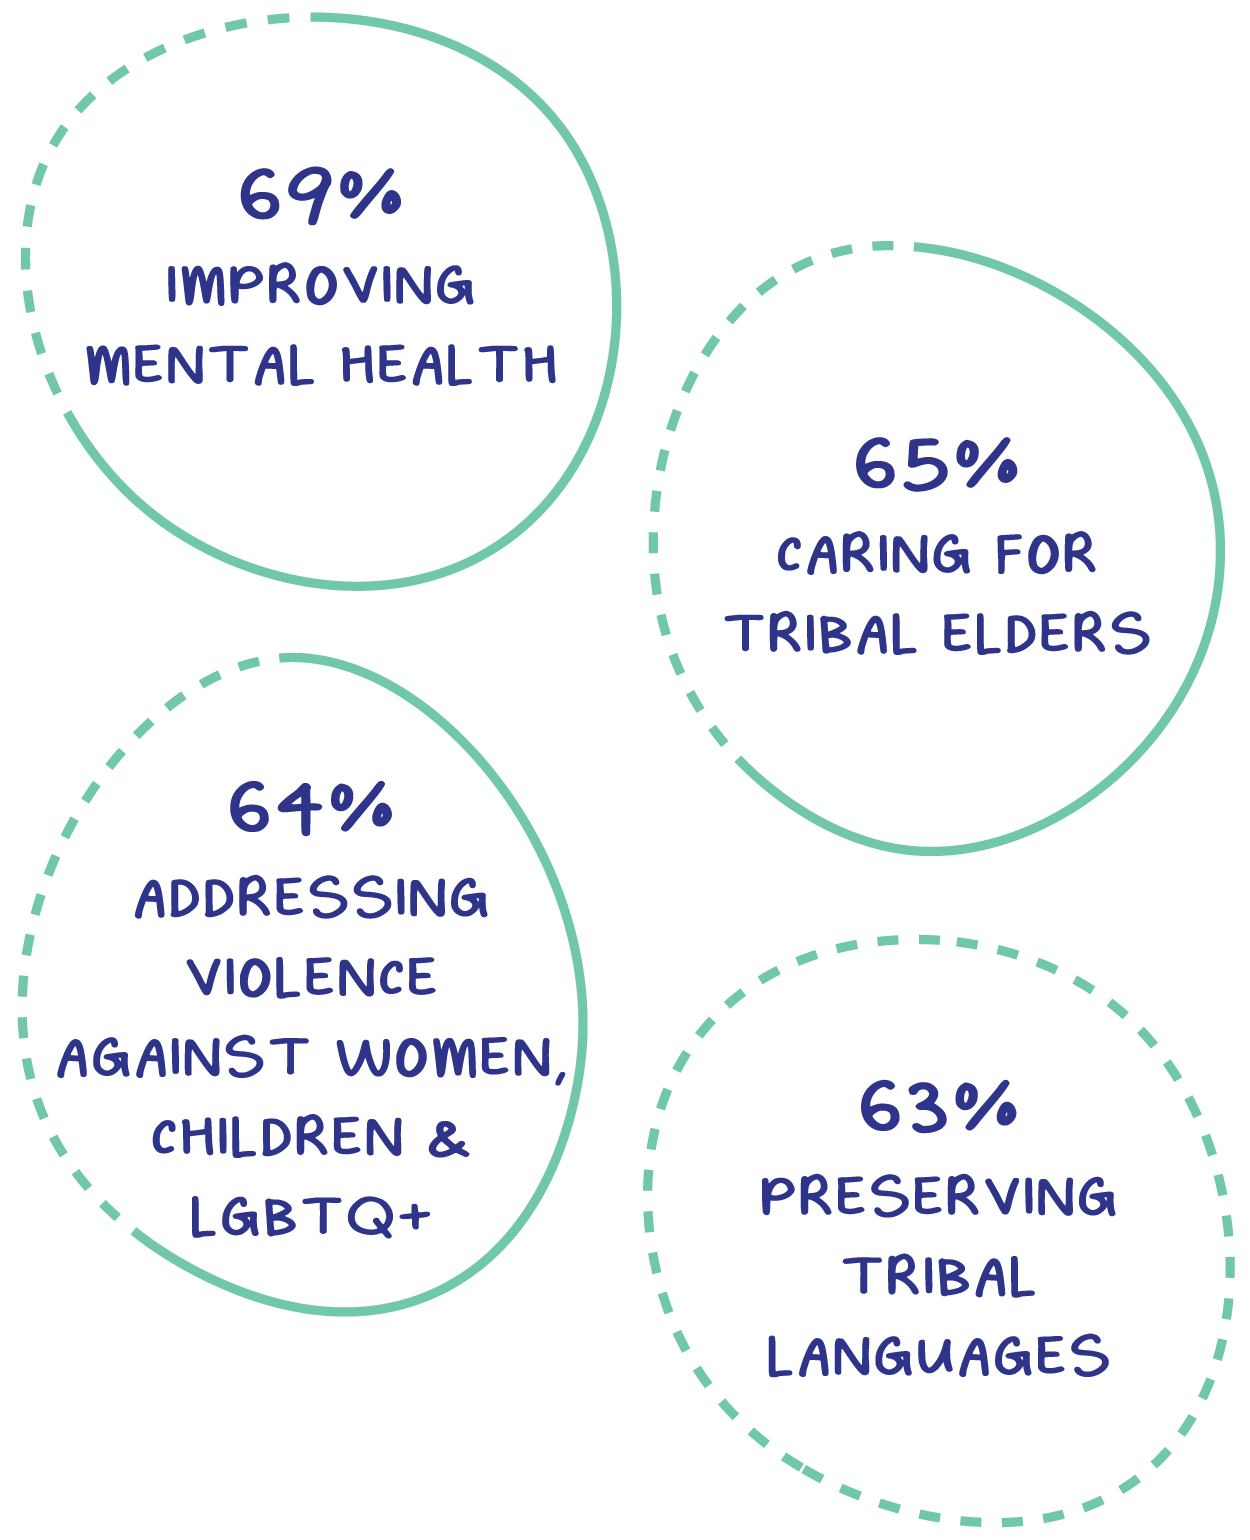 Several pie charts depicting different percentages of Native American priorities including: 69% Native Americans want to improve mental health, 65% care for tribal elders, 64% address violence against women, children and LGBTQ+, 63% preserving tribal languages.